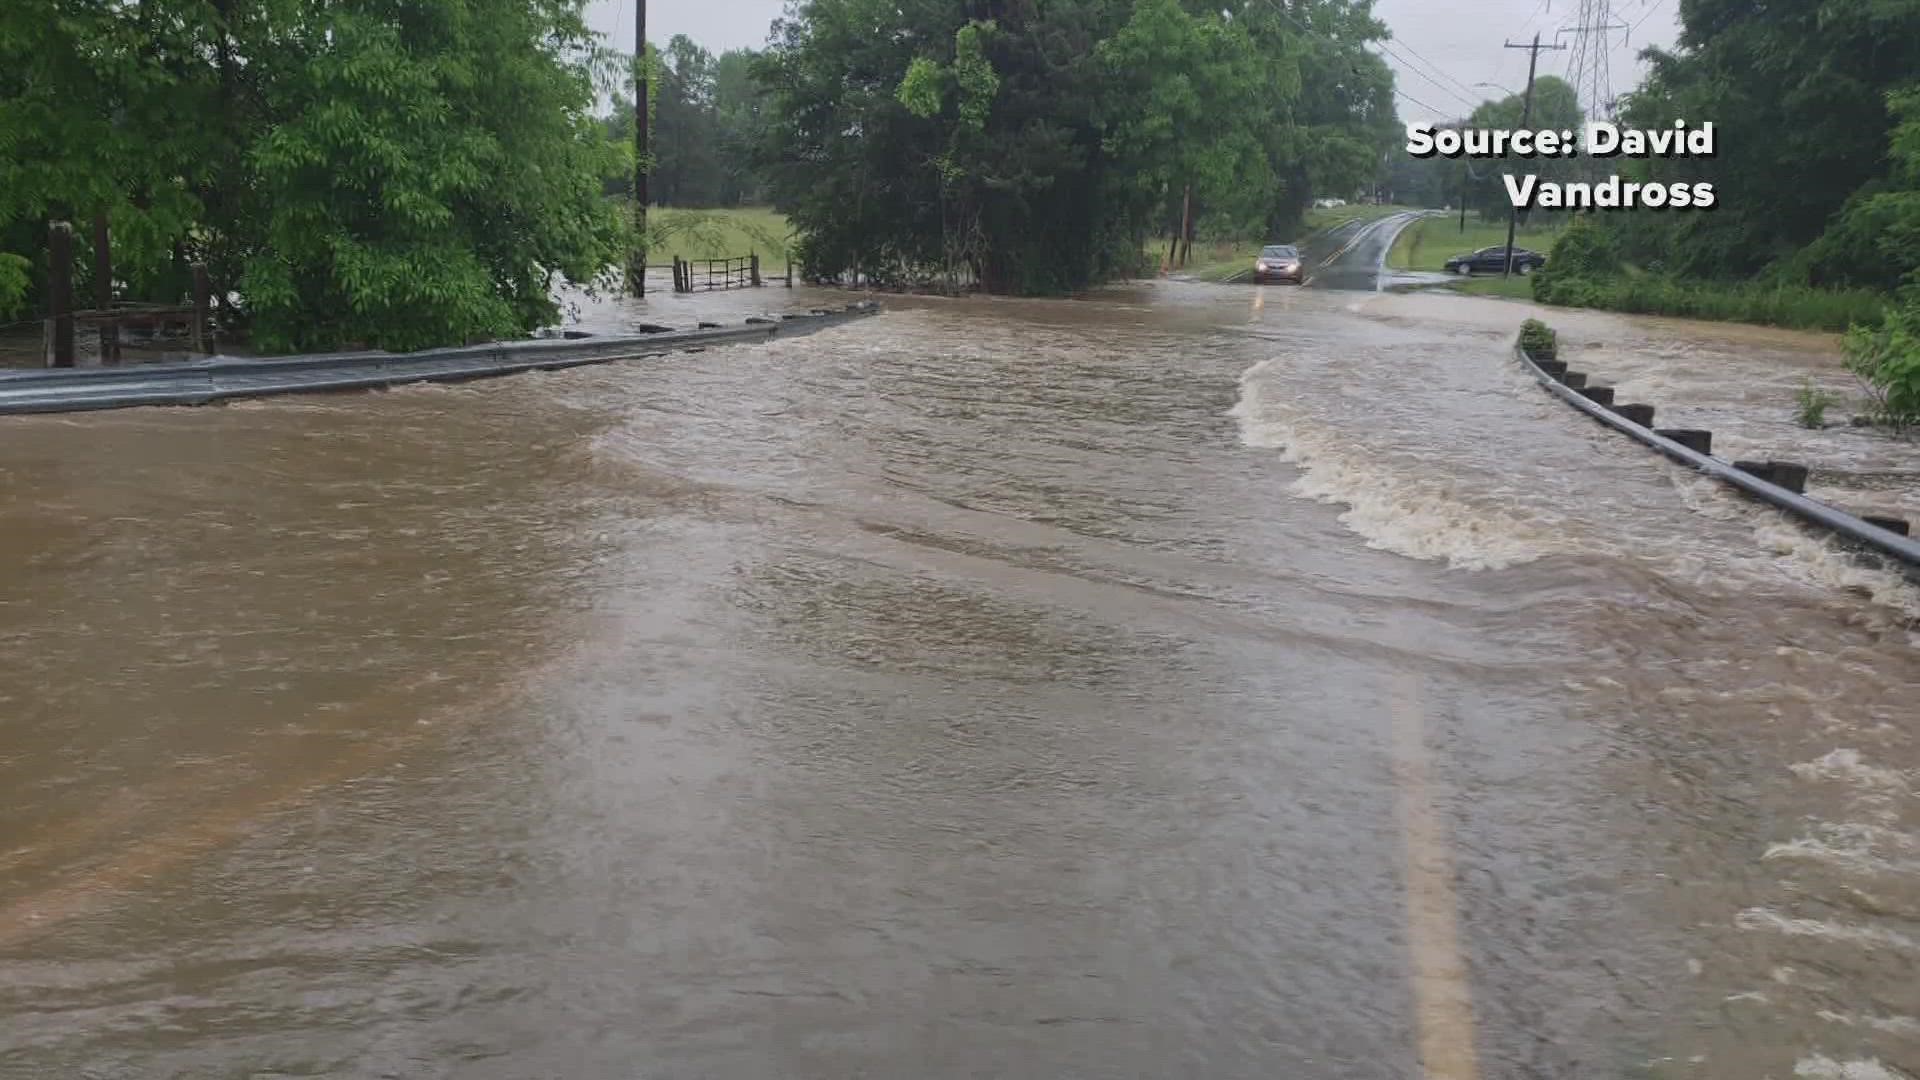 People who live in the neighborhood say a creek near the homes causes flooding during fast, heavy rain.